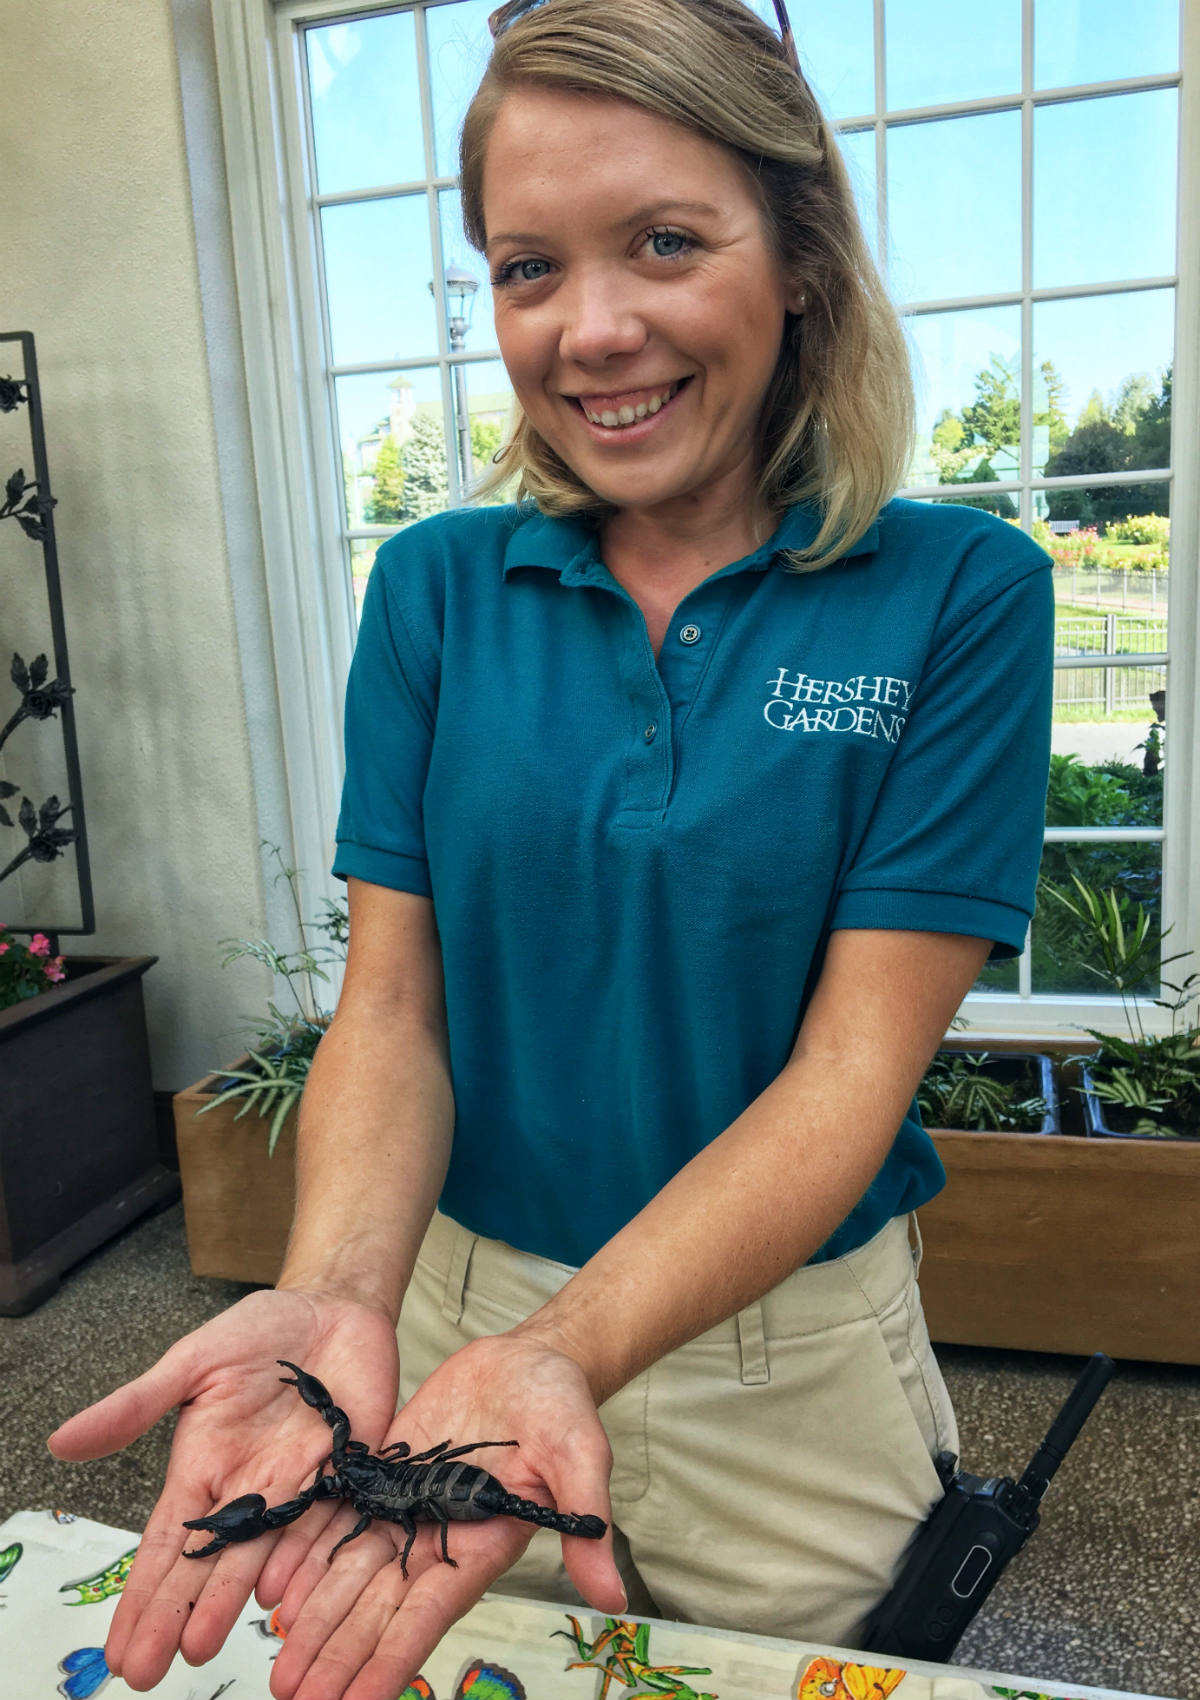 Megan Talley holding a scorpion at Hershey Gardens.